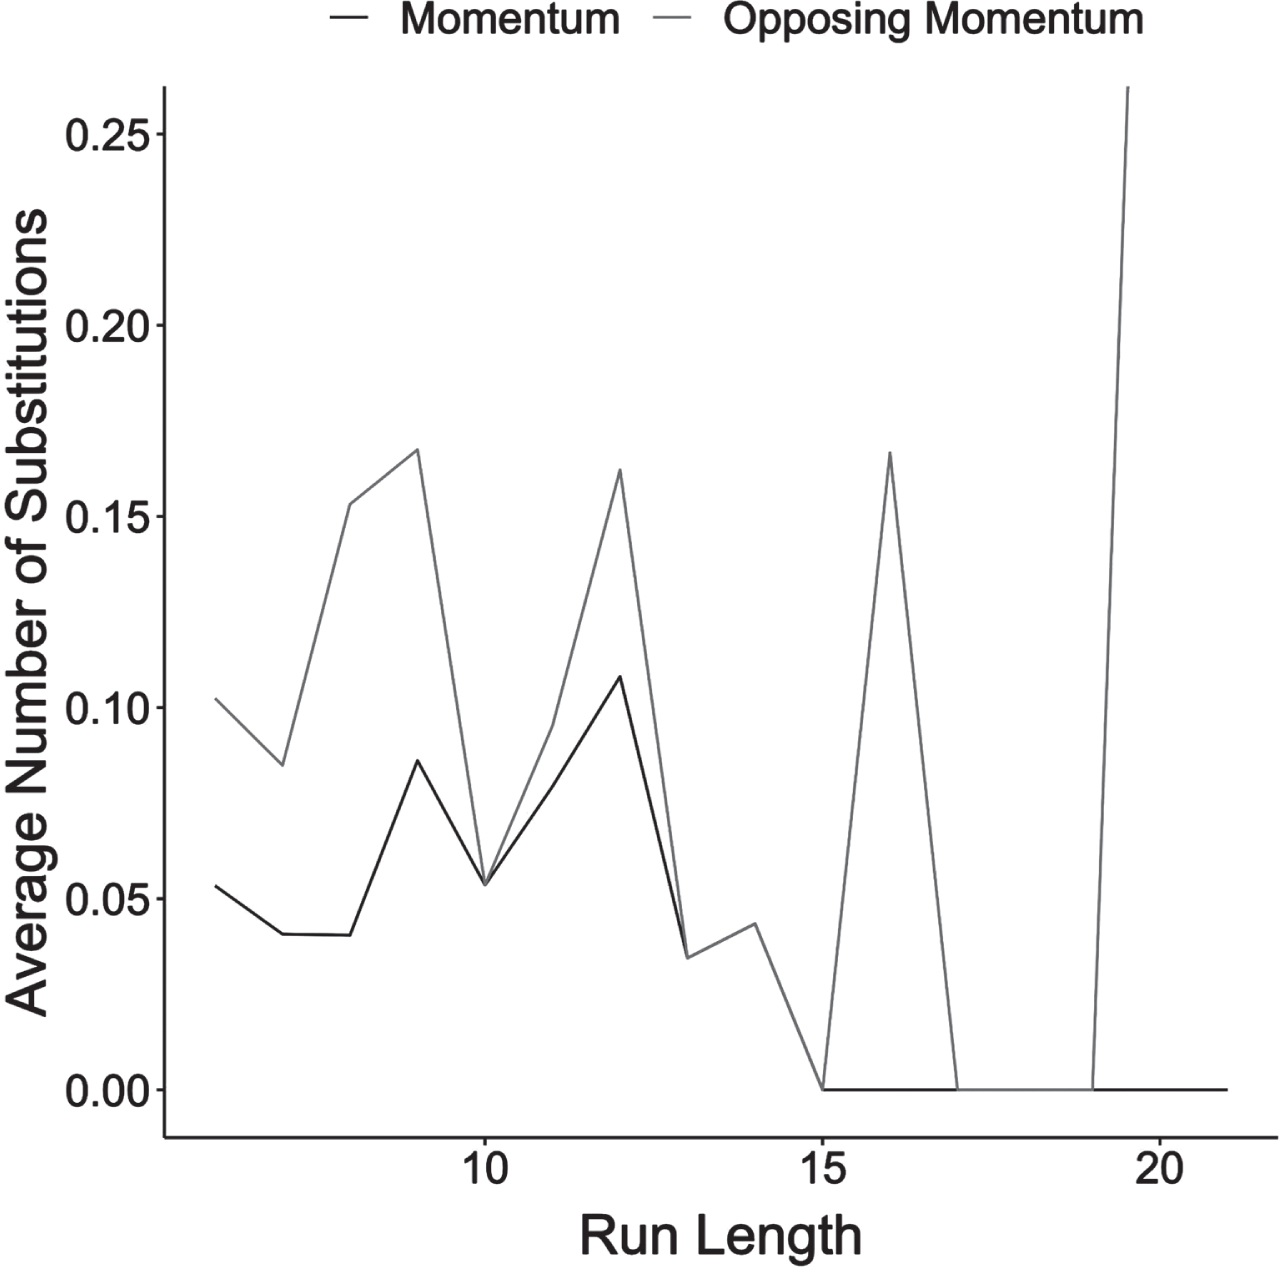 Relationship Between Substitutions and Run Size. If coaches use TV timeouts to change strategy and believe that a longer run reflects a worse strategy on the opposing team’s part, then the number of substitutions should increase as run length increases. Instead, there is no relationship between run length and the number of substitutions by either team, and a regression (not shown) confirms that the slope of this relationship is not distinguishable from zero. While coaches may use substitutions to change strategy, that they do not change the number of substitutions as runs become longer suggest that any strategy change is not related to the run itself.